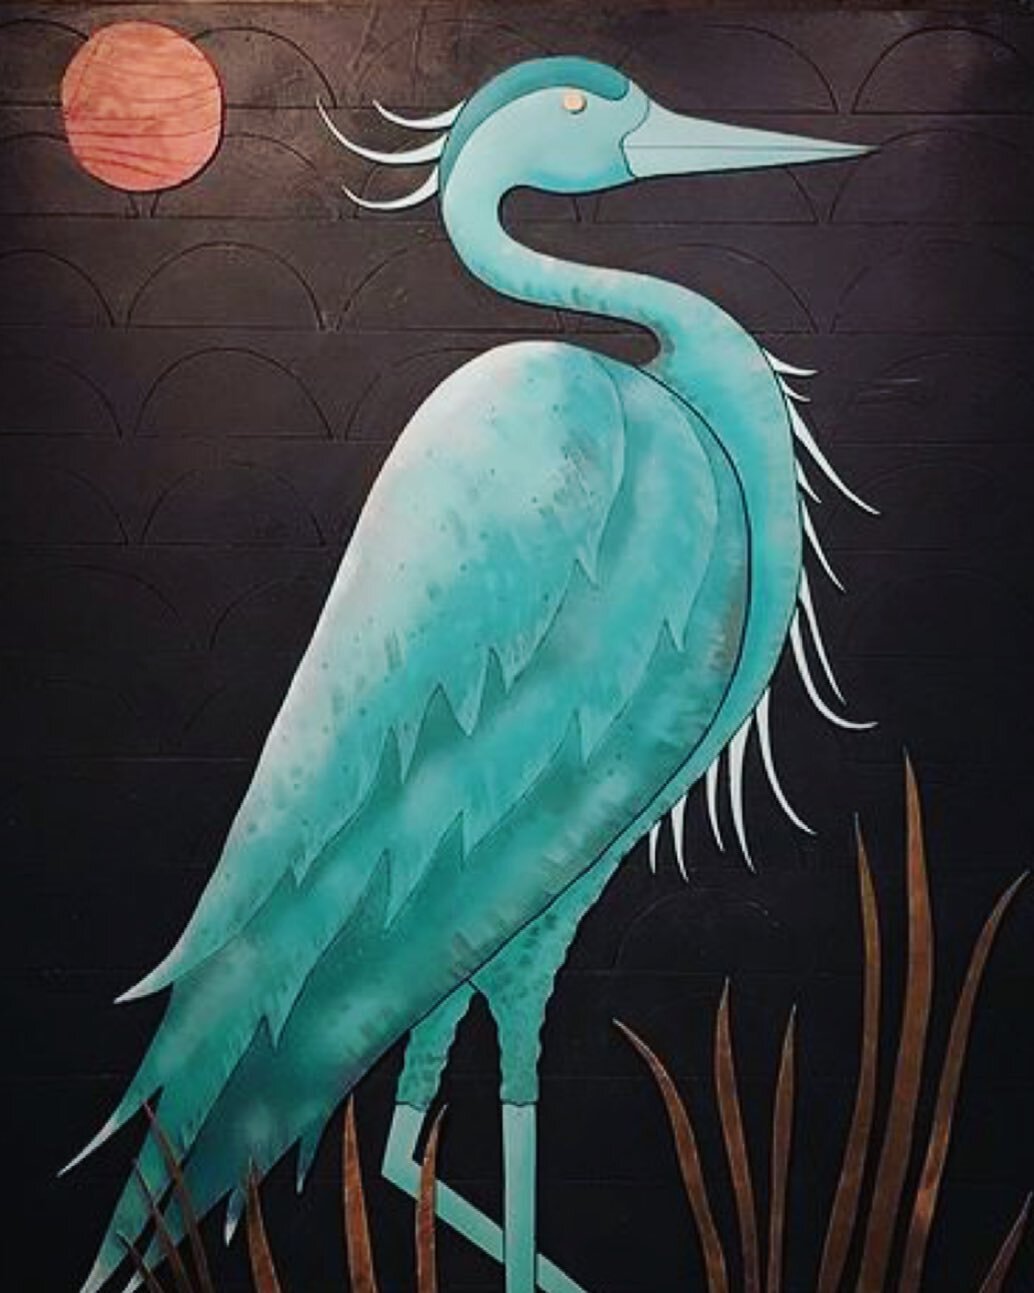 What animal best represents you?
.
In this last life season, I was a Great Blue Heron and I was going through a patient transformation. I was experiencing some really significant life changes and found myself growing in unexpected directions. I found